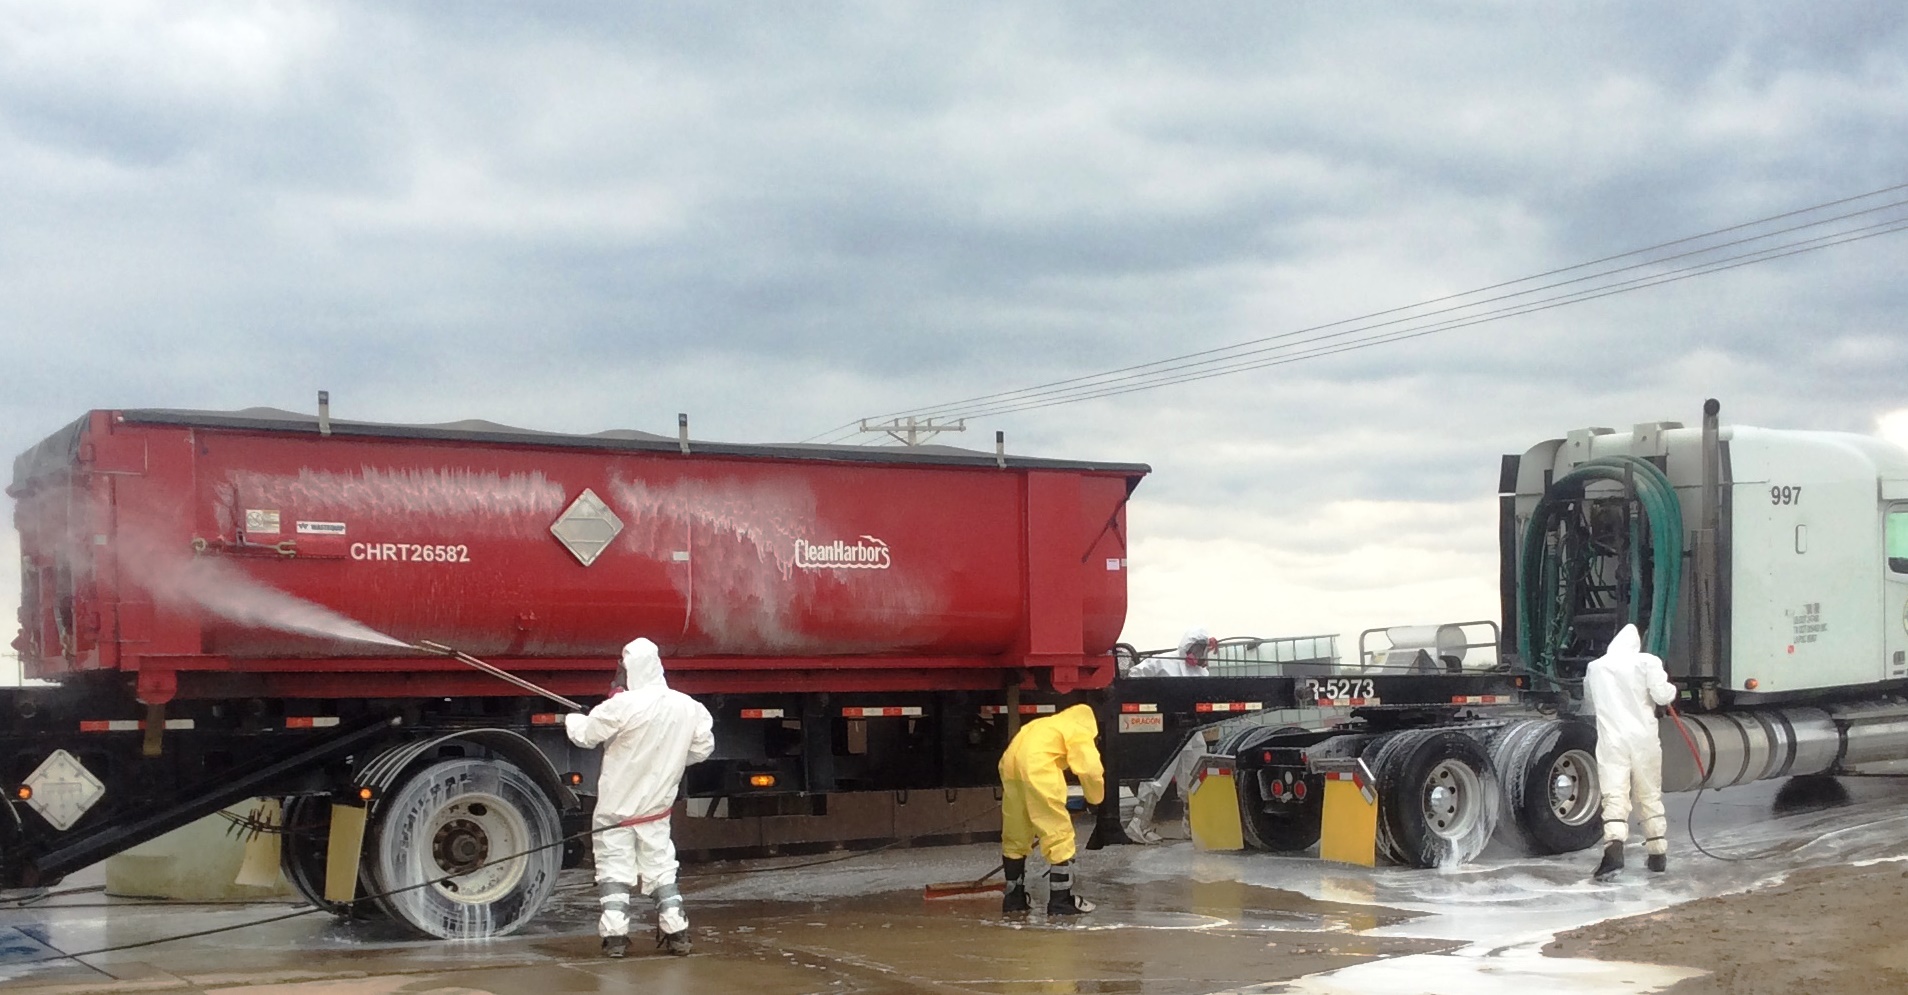 A feed truck being disinfected before entering a pig farm